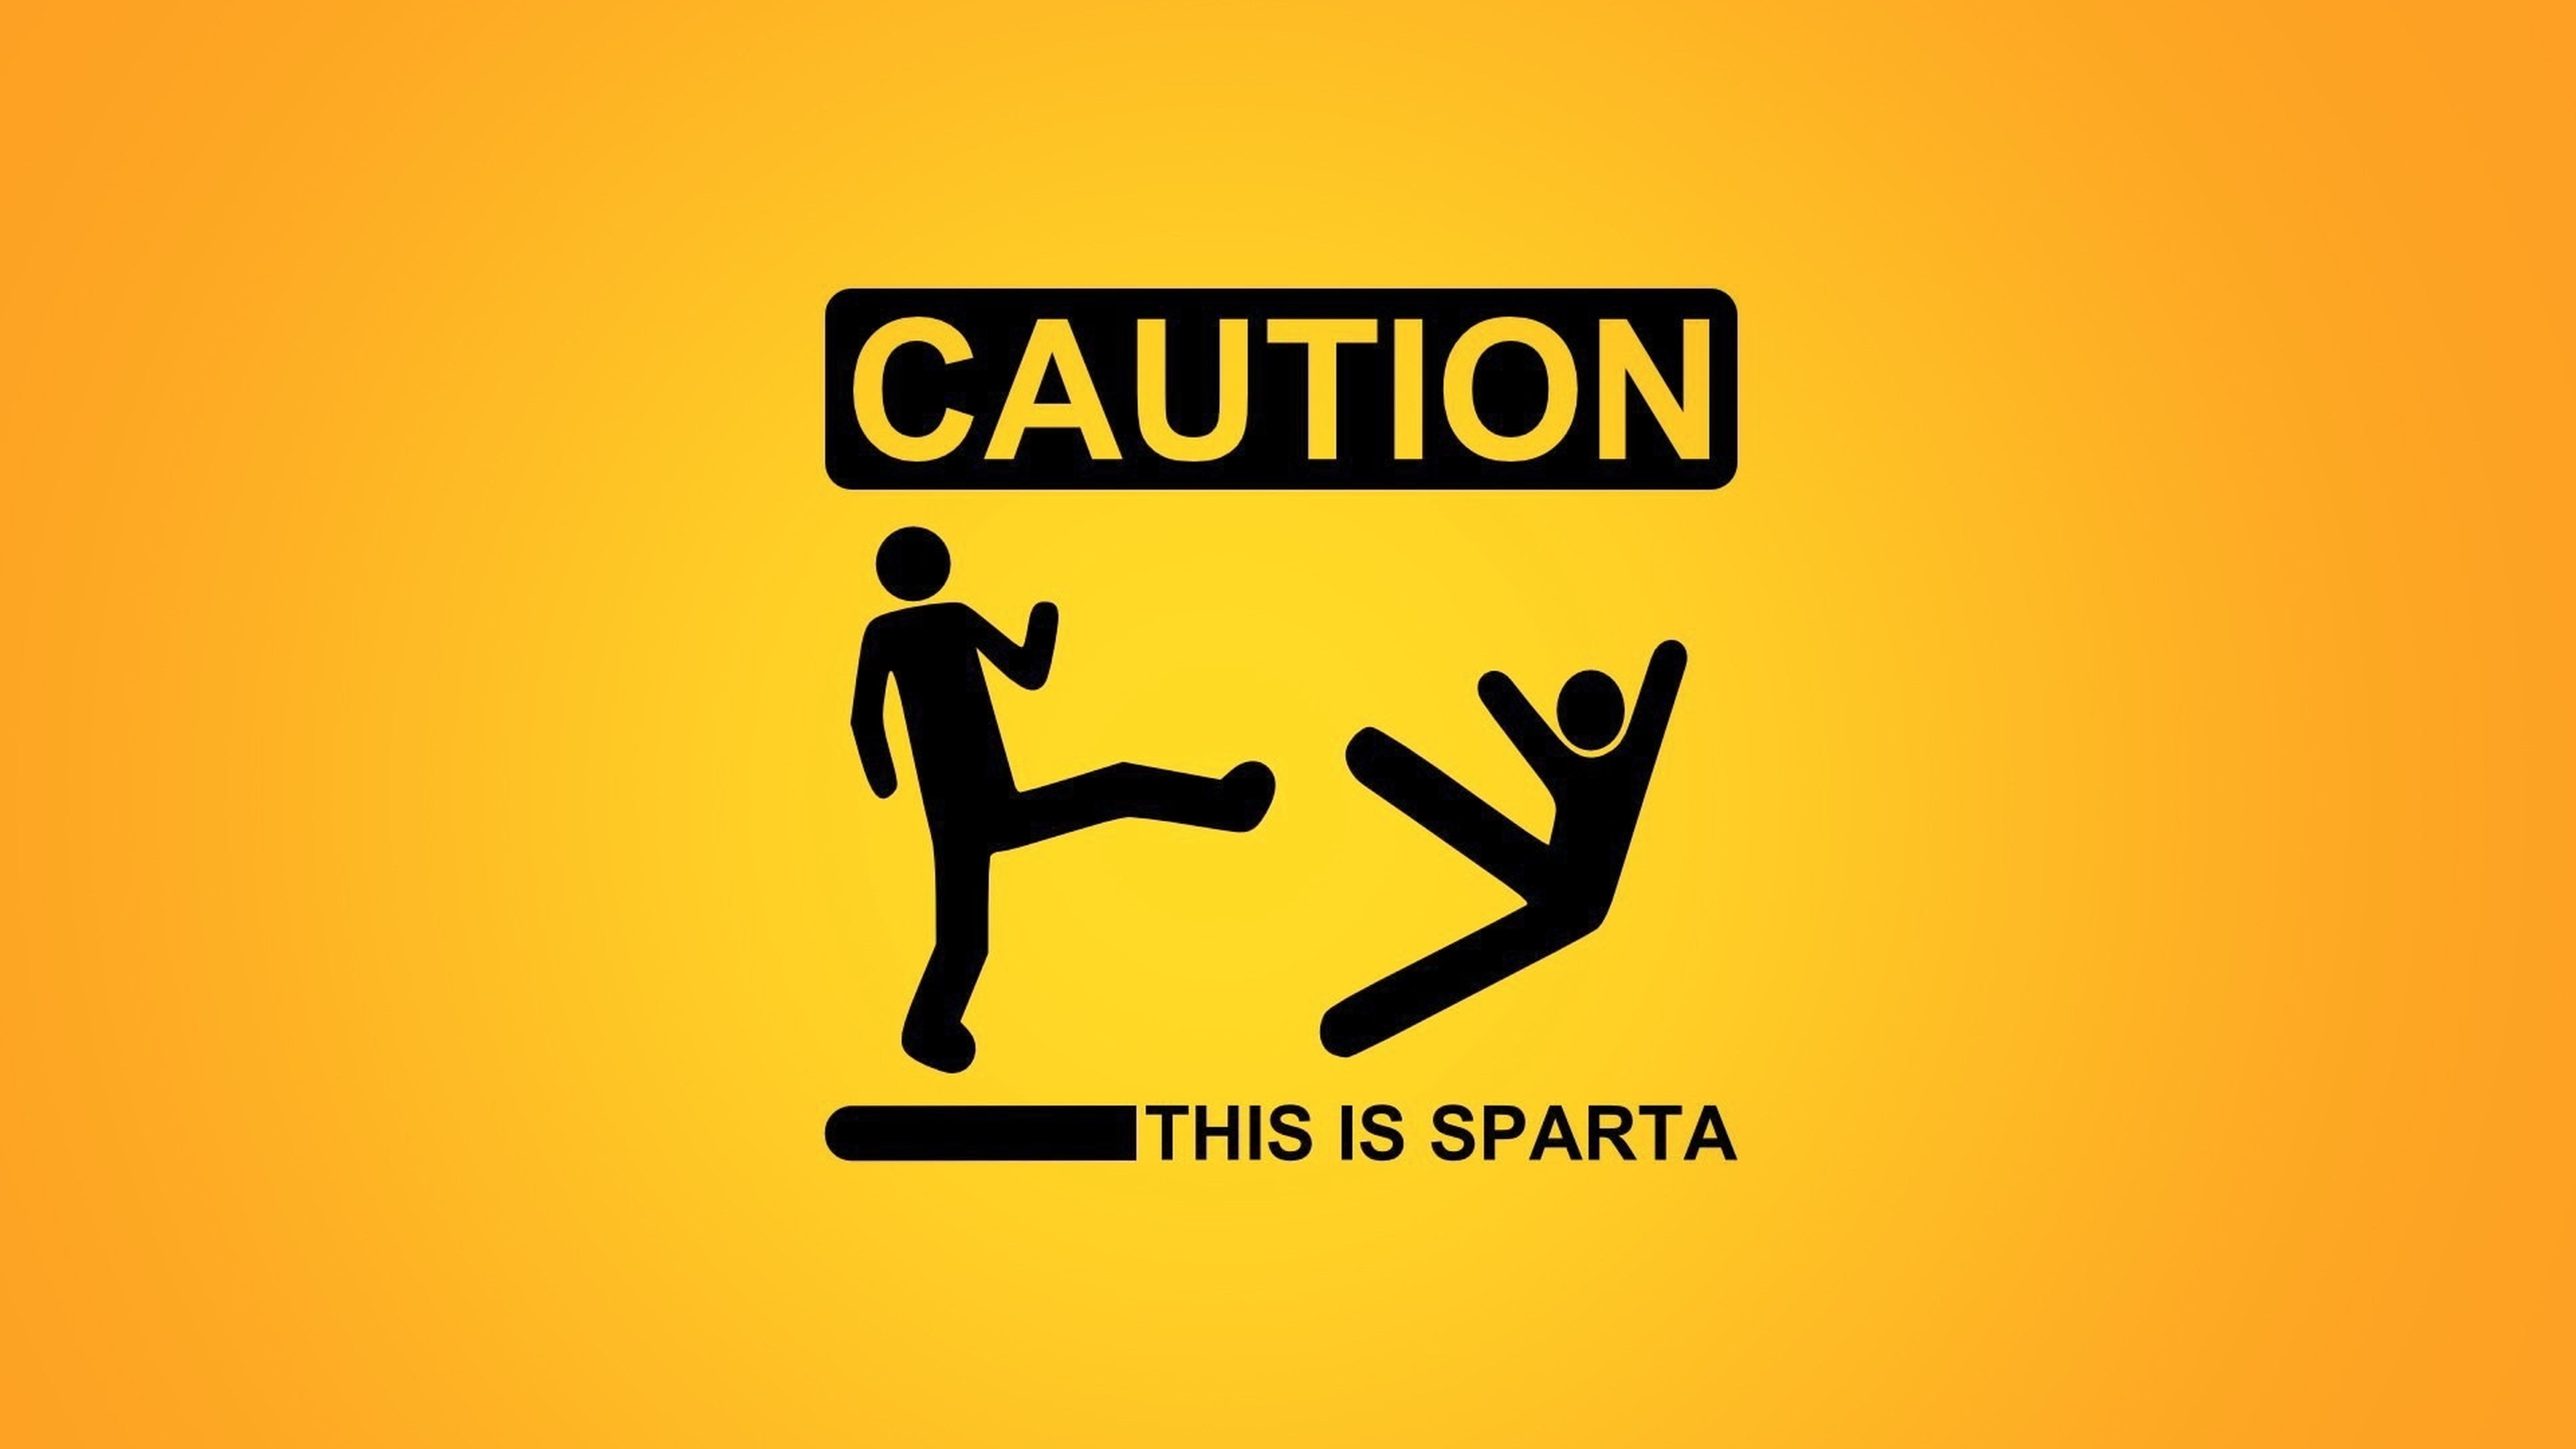 3840x2160 Download Caution Sparta Silly for 4K UHD 16:9 Wallpaper : Funny Wallpaper  for Phone & Desktop Backgrounds Collections